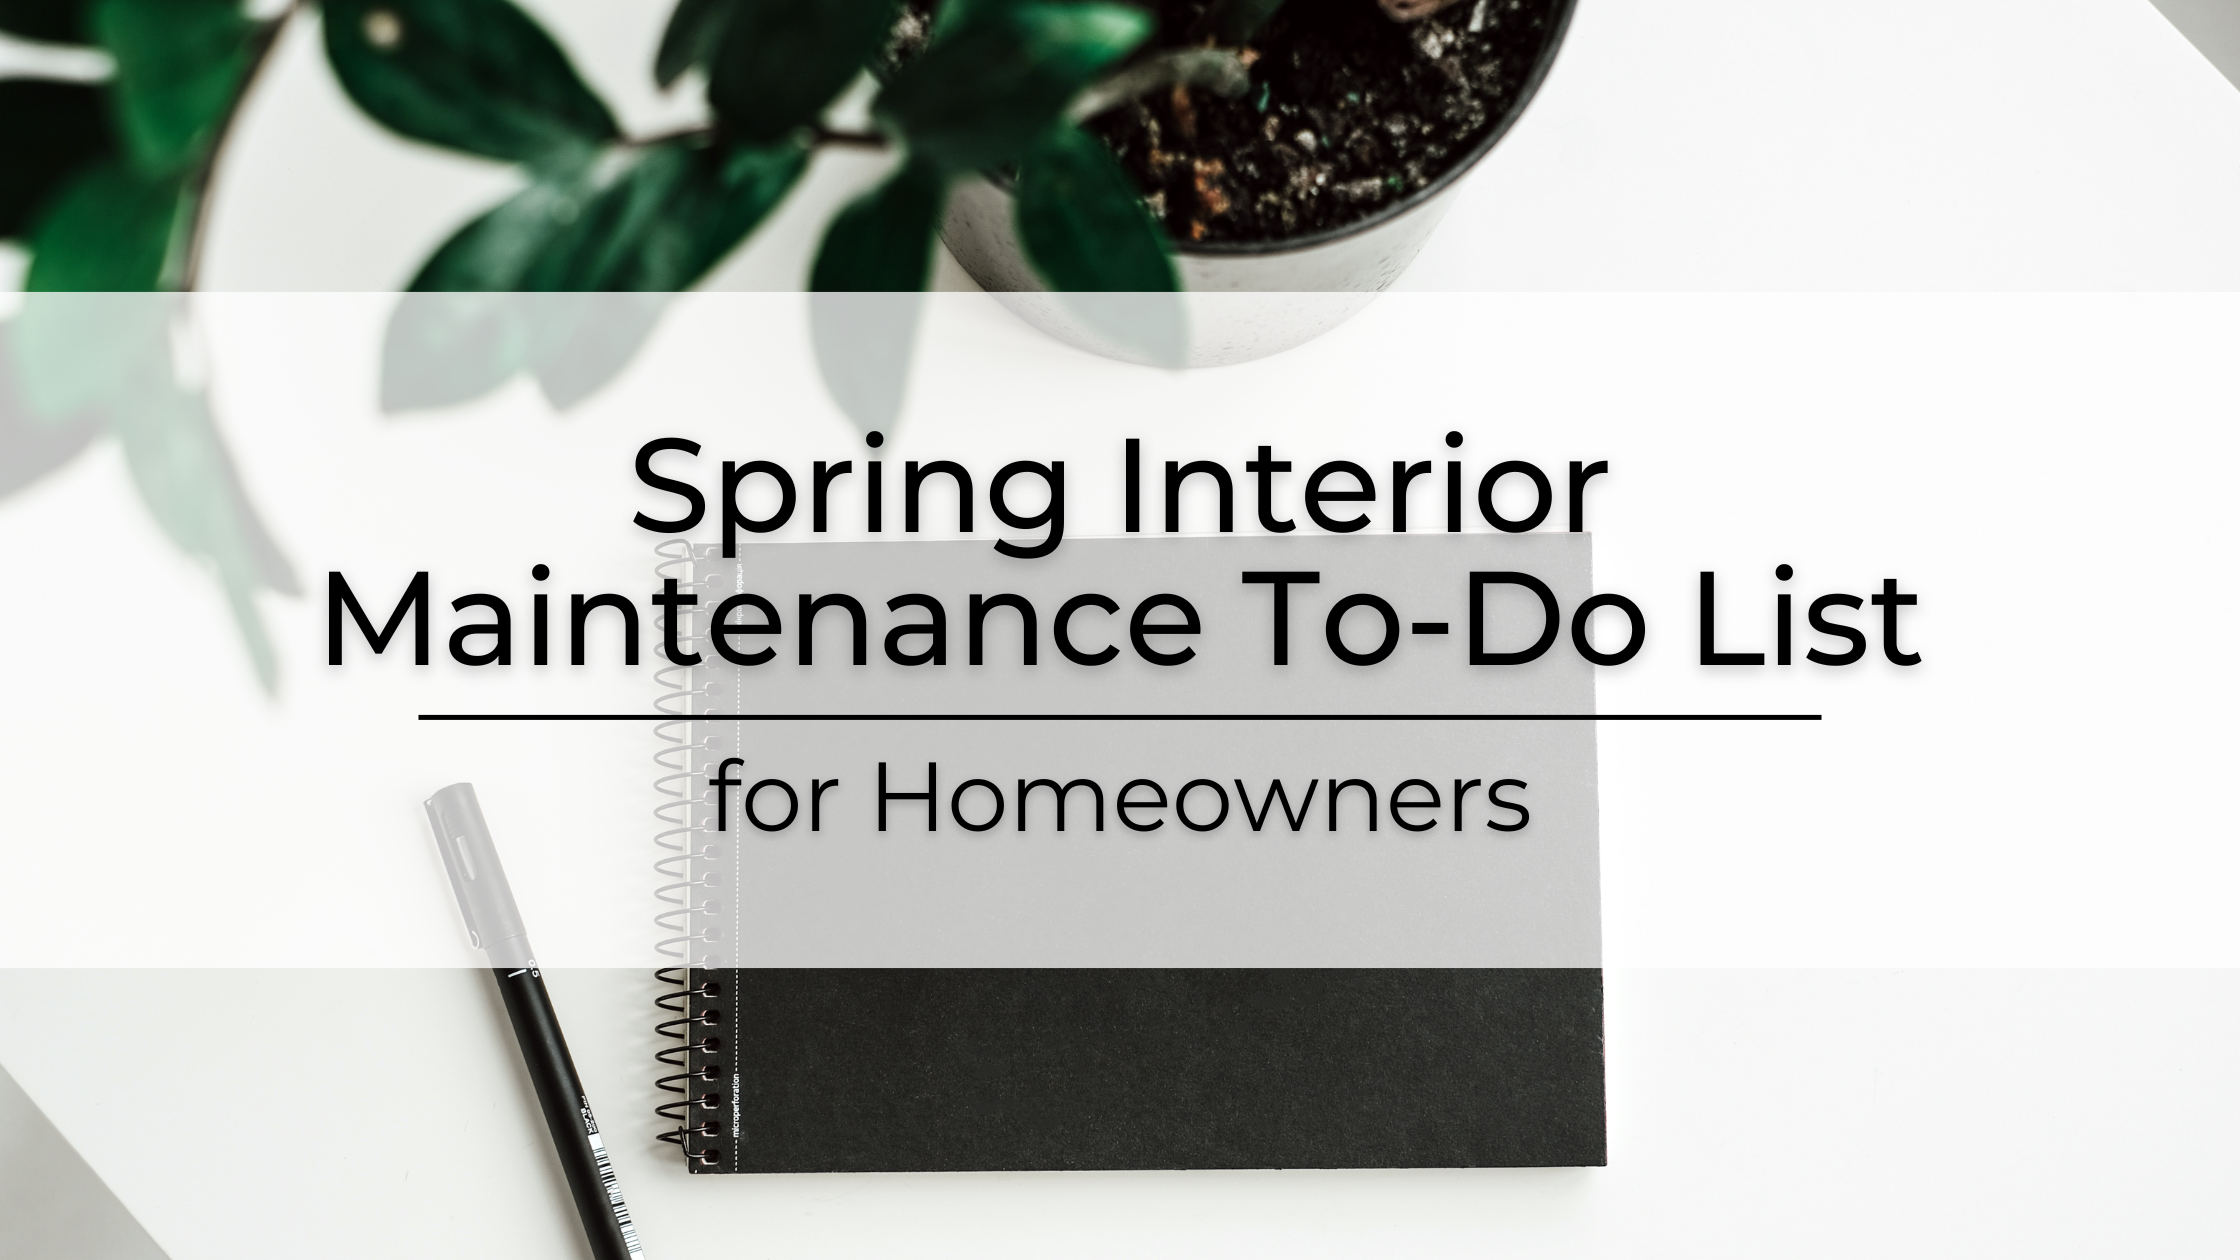 Spring Interior Maintenance To-Do List for Homeowners